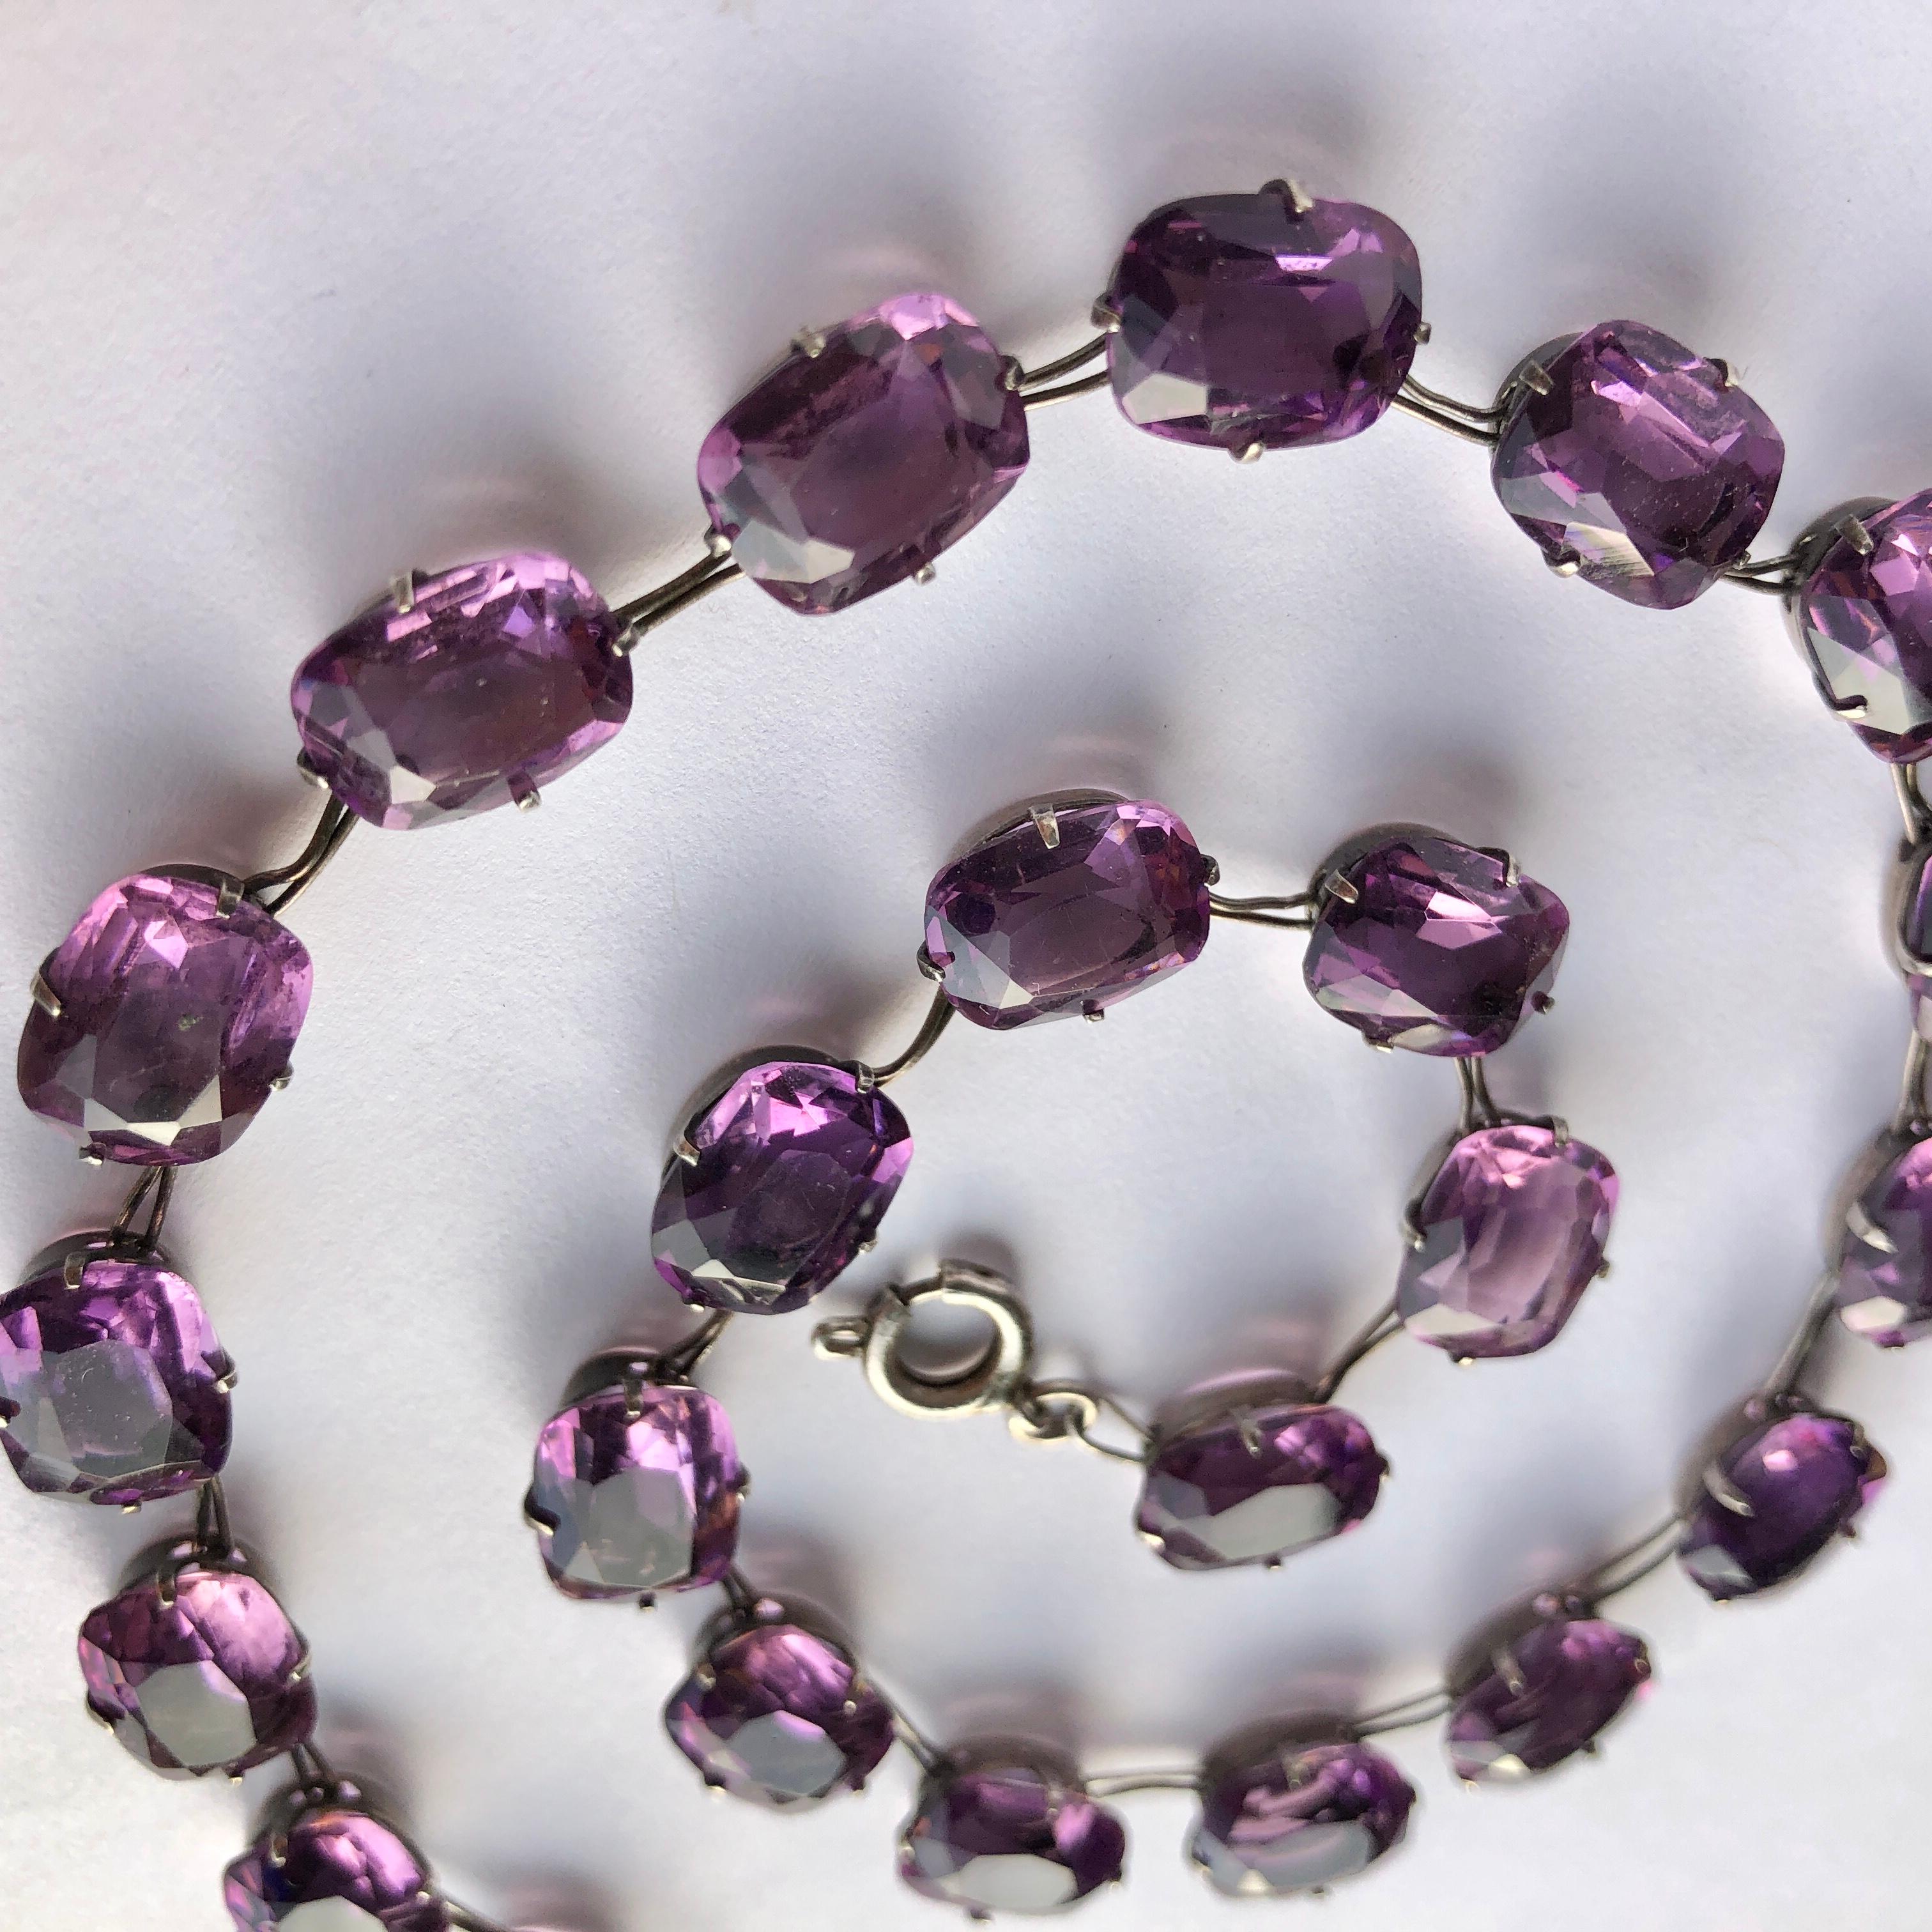 The amethyst stones are a gorgeous bright purple colour which sit beautifully with the simple silver settings. 

Length: 37cm
Stone Dimensions: 9x11mm

Weight: 26.33g